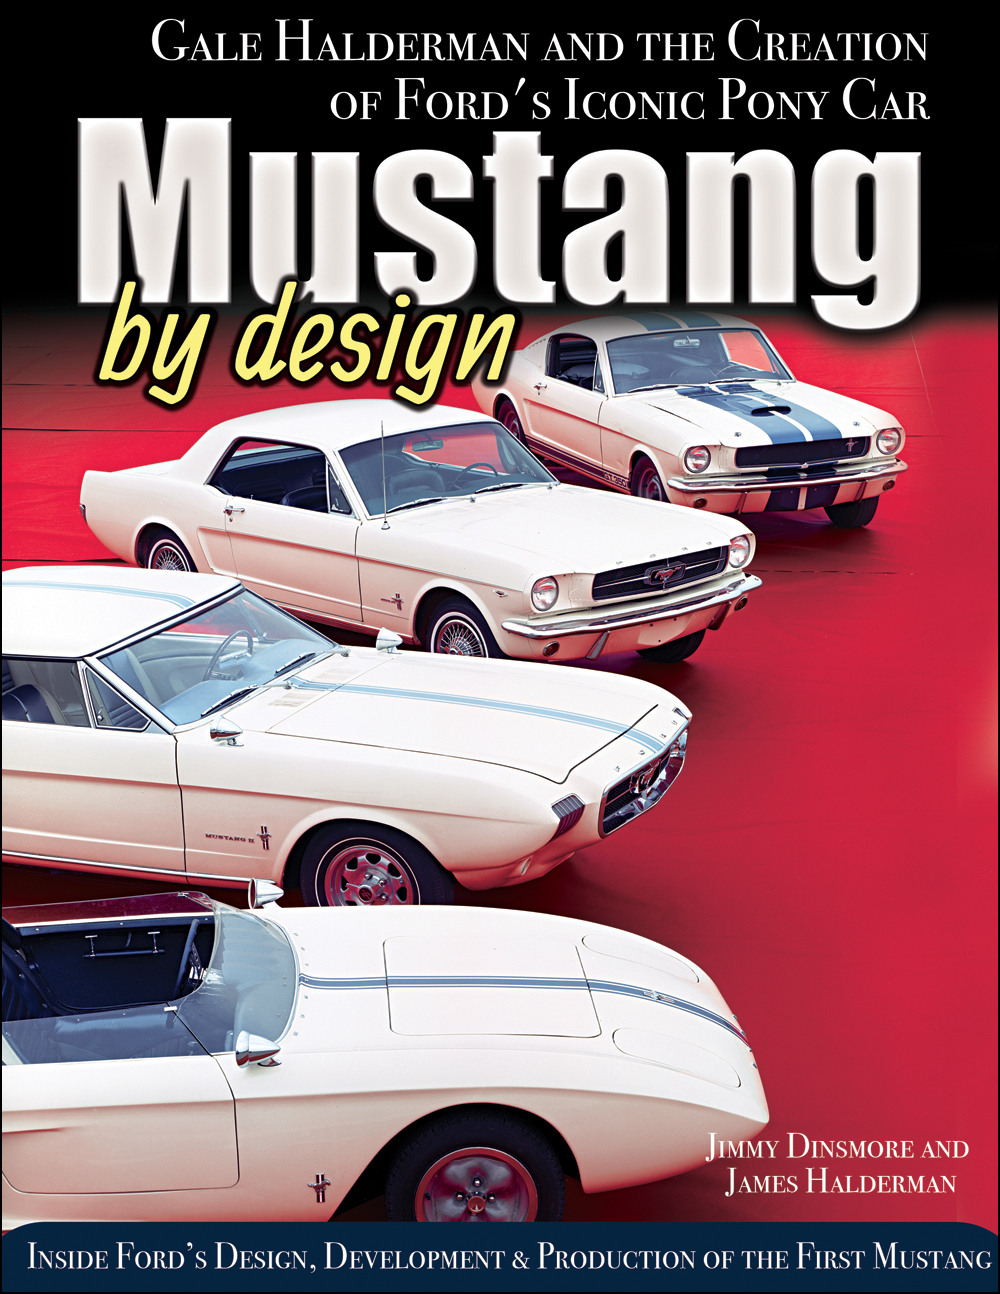 1964-1970 Mustang by Design:  Gale Halderman and the Creation of Ford's Iconic Pony Car